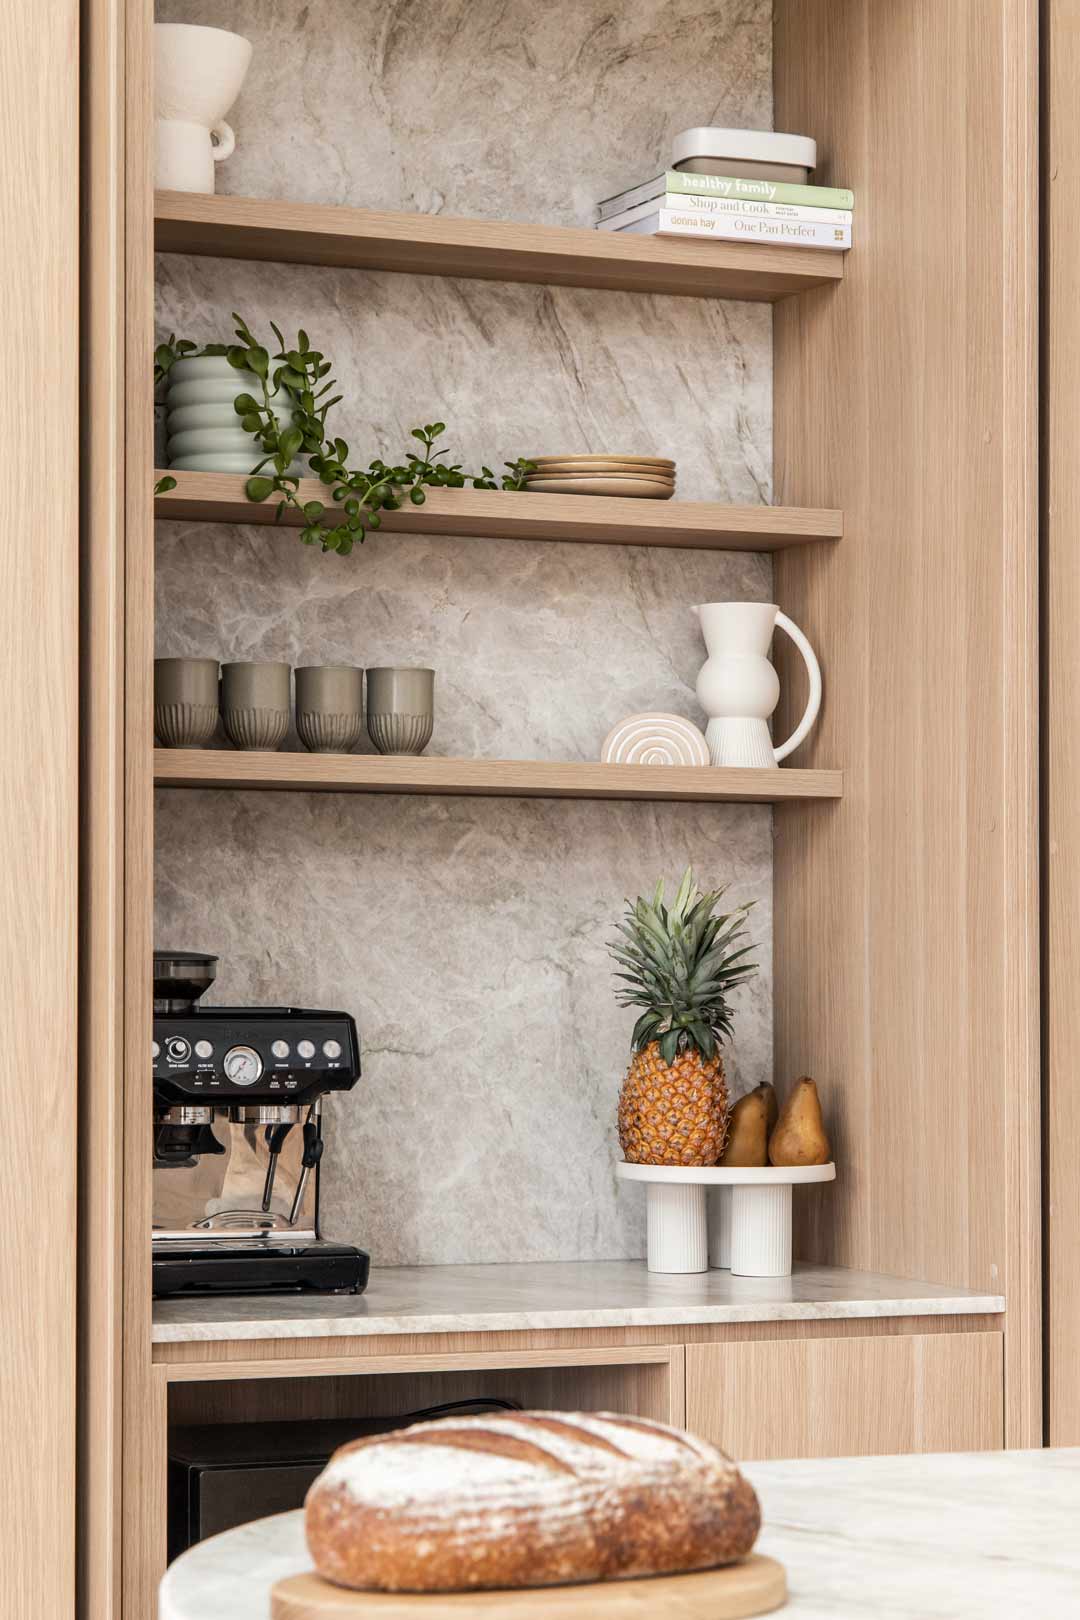 https://www.abiinteriors.com.au/wp-content/uploads/Simple-home-coffee-bar-set-up-seemlessly-intergrated-out-of-the-way-in-the-kitchen-of-modern-coastal-home.jpg